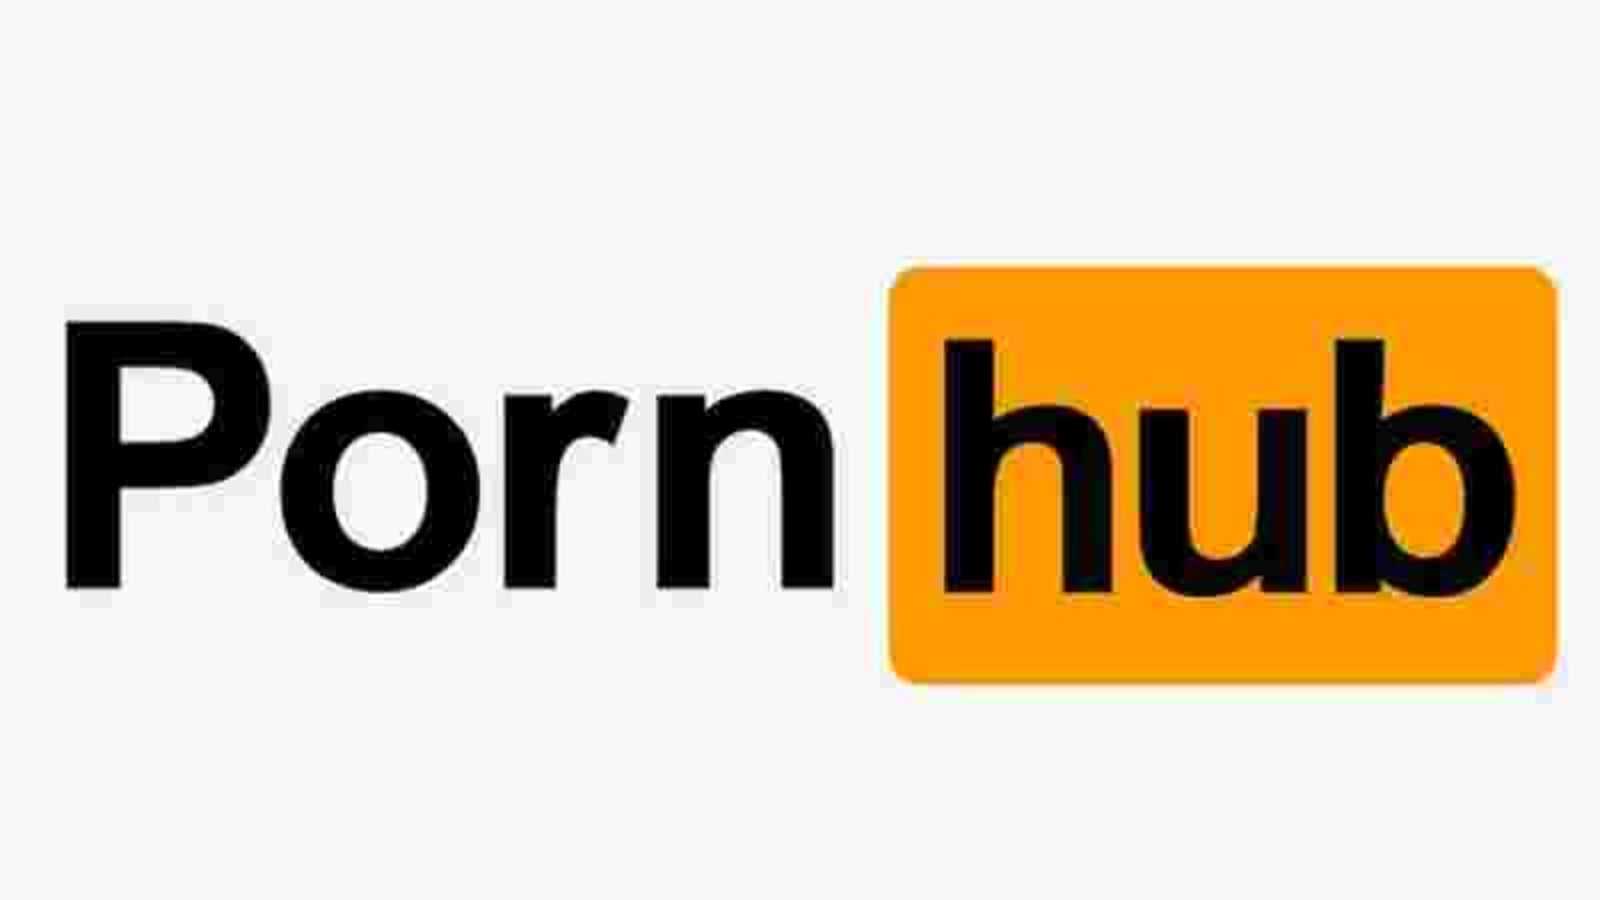 Pornhub is now only accepting cryptocurrency for its premium service Tech News picture